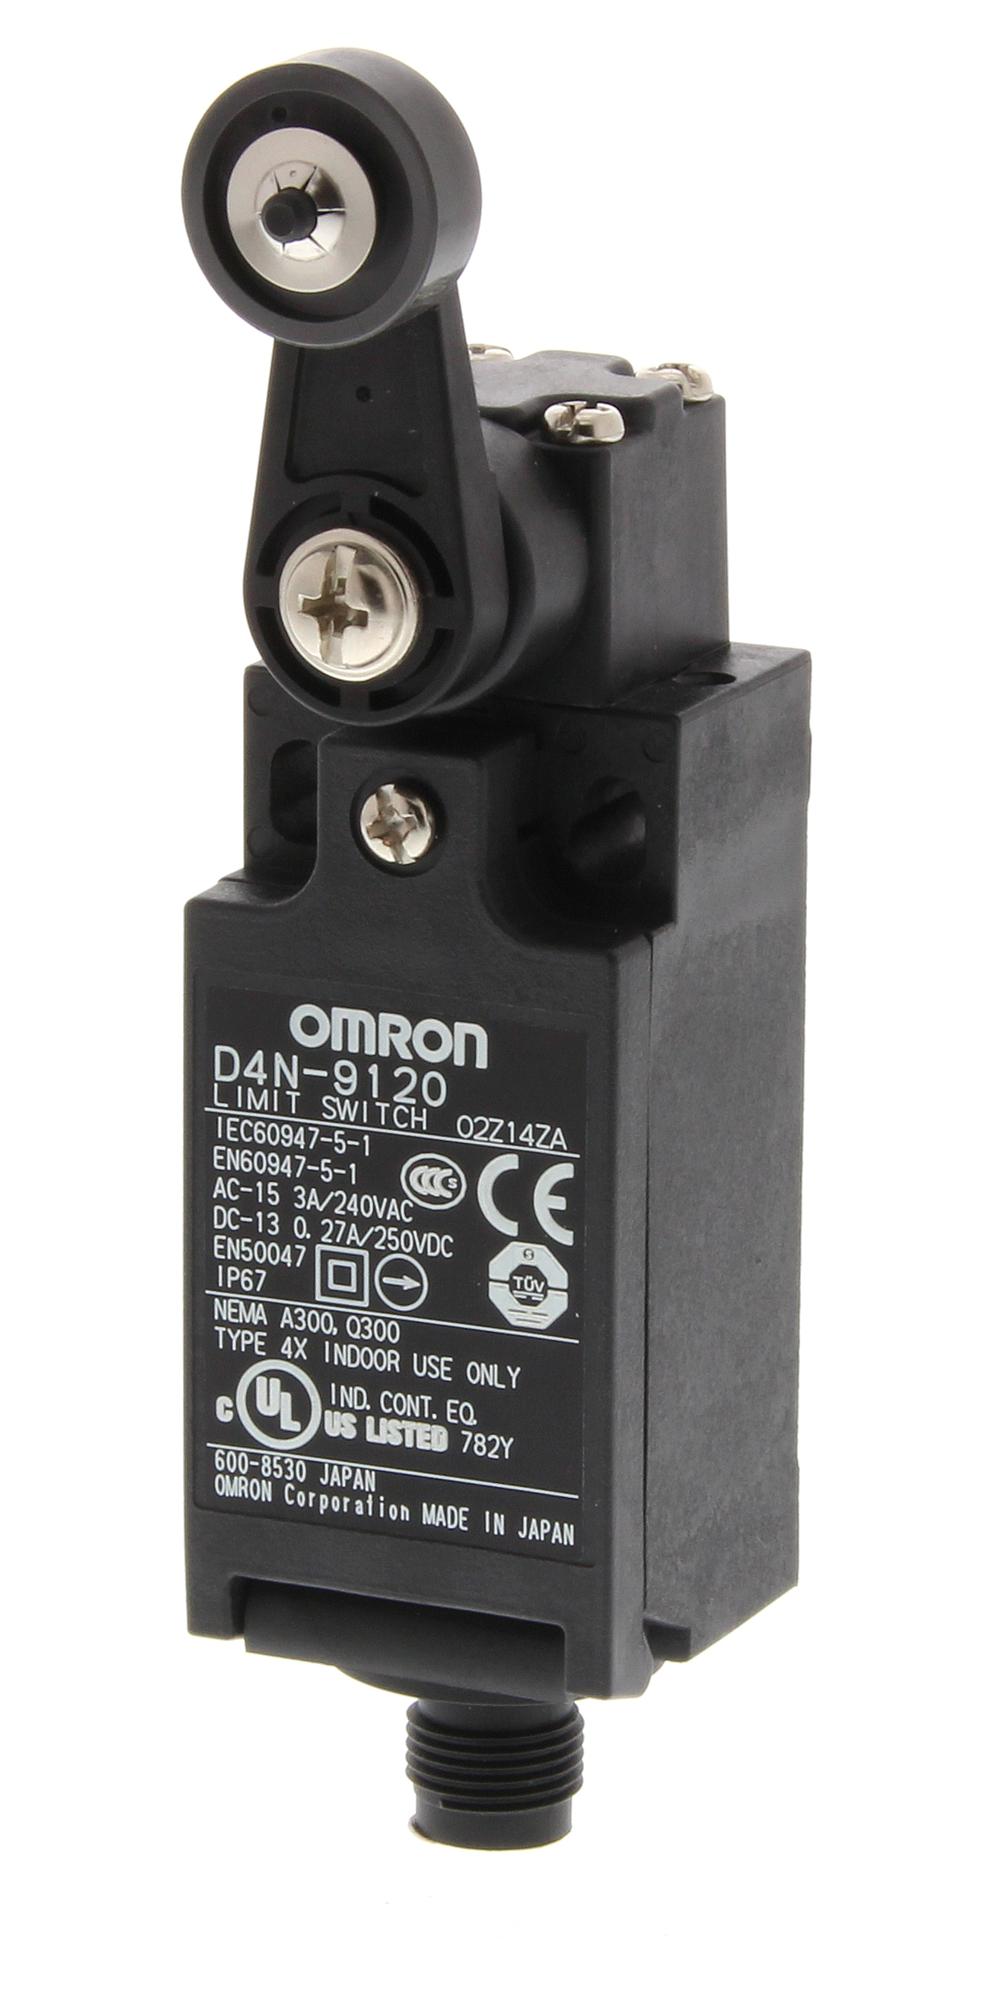 D4N-9120 LIMIT SWITCH SWITCHES OMRON